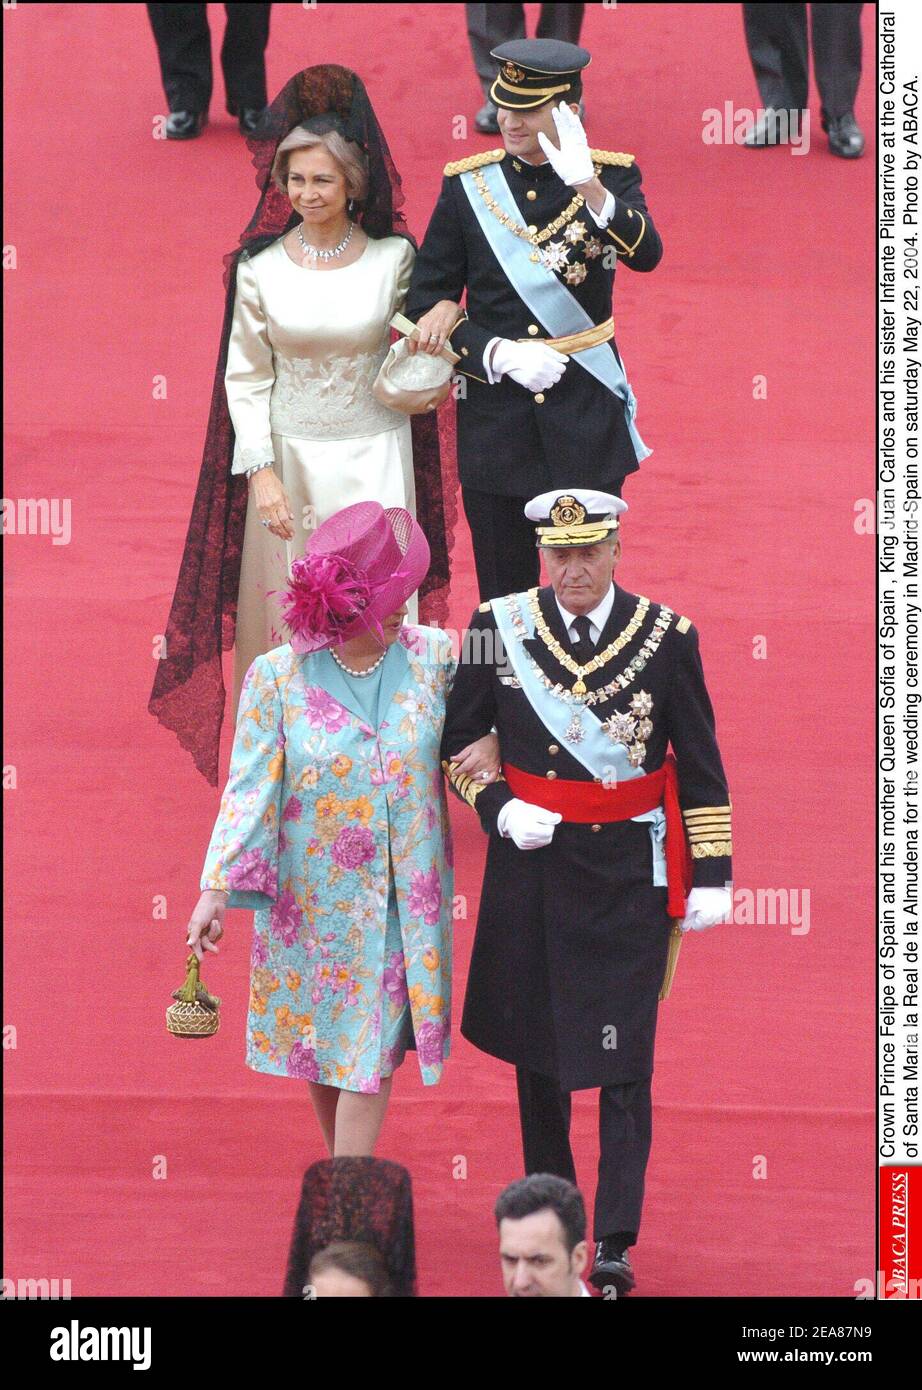 Crown Prince Felipe of Spain and his mother Queen Sofia of Spain , King Juan Carlos and his sister Infante Pilar arrive at the Cathedral of Santa Maria la Real de la Almudena for the wedding ceremony in Madrid-Spain on saturday May 22, 2004. Photo by ABACA. Stock Photo